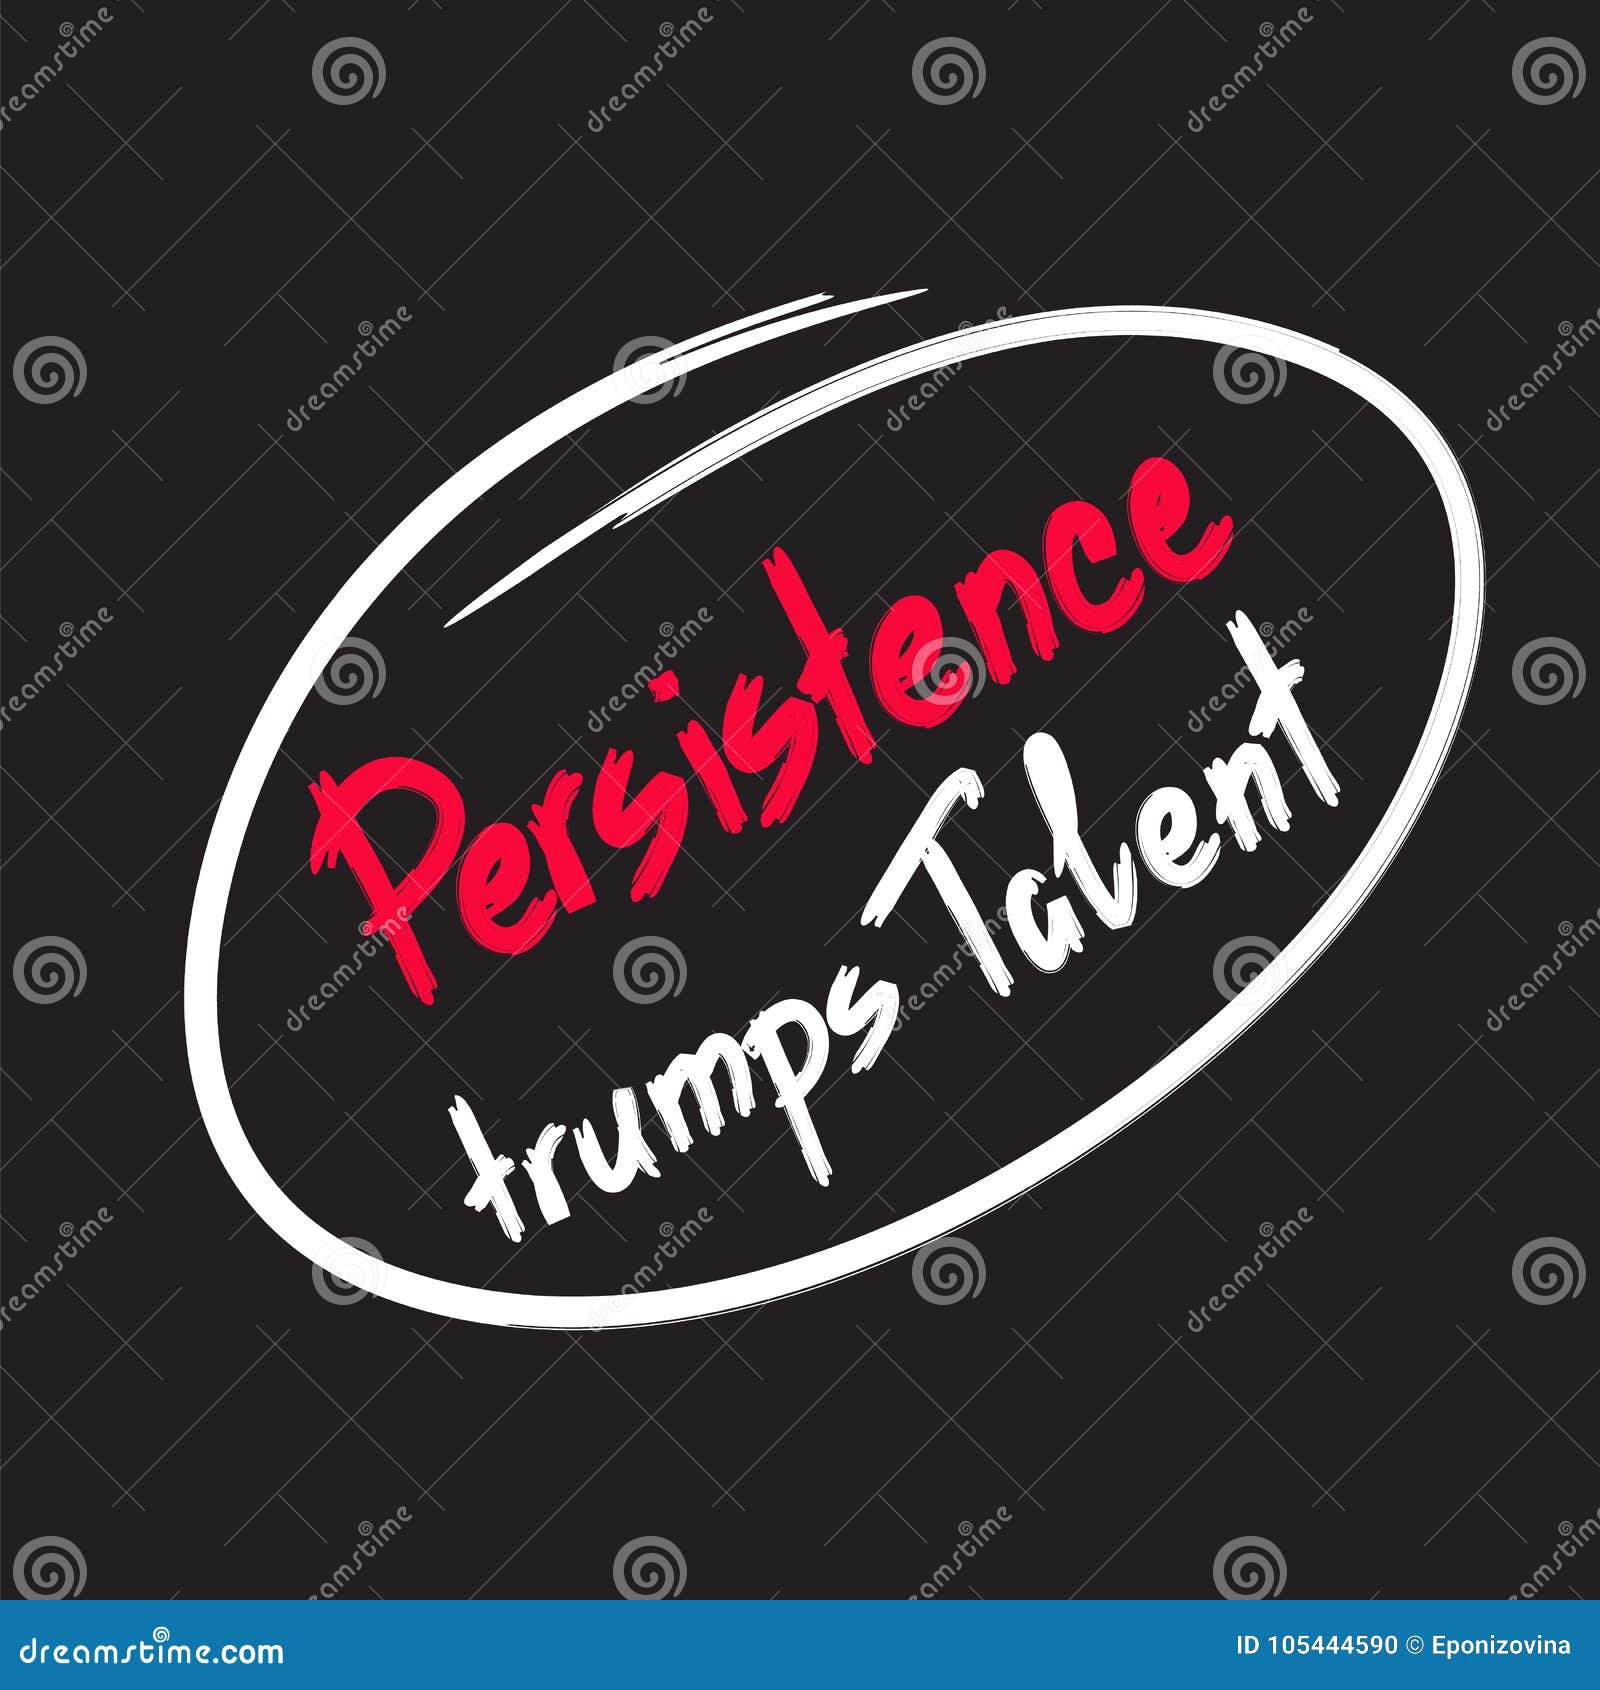 persistence trumps talent quote lettering.